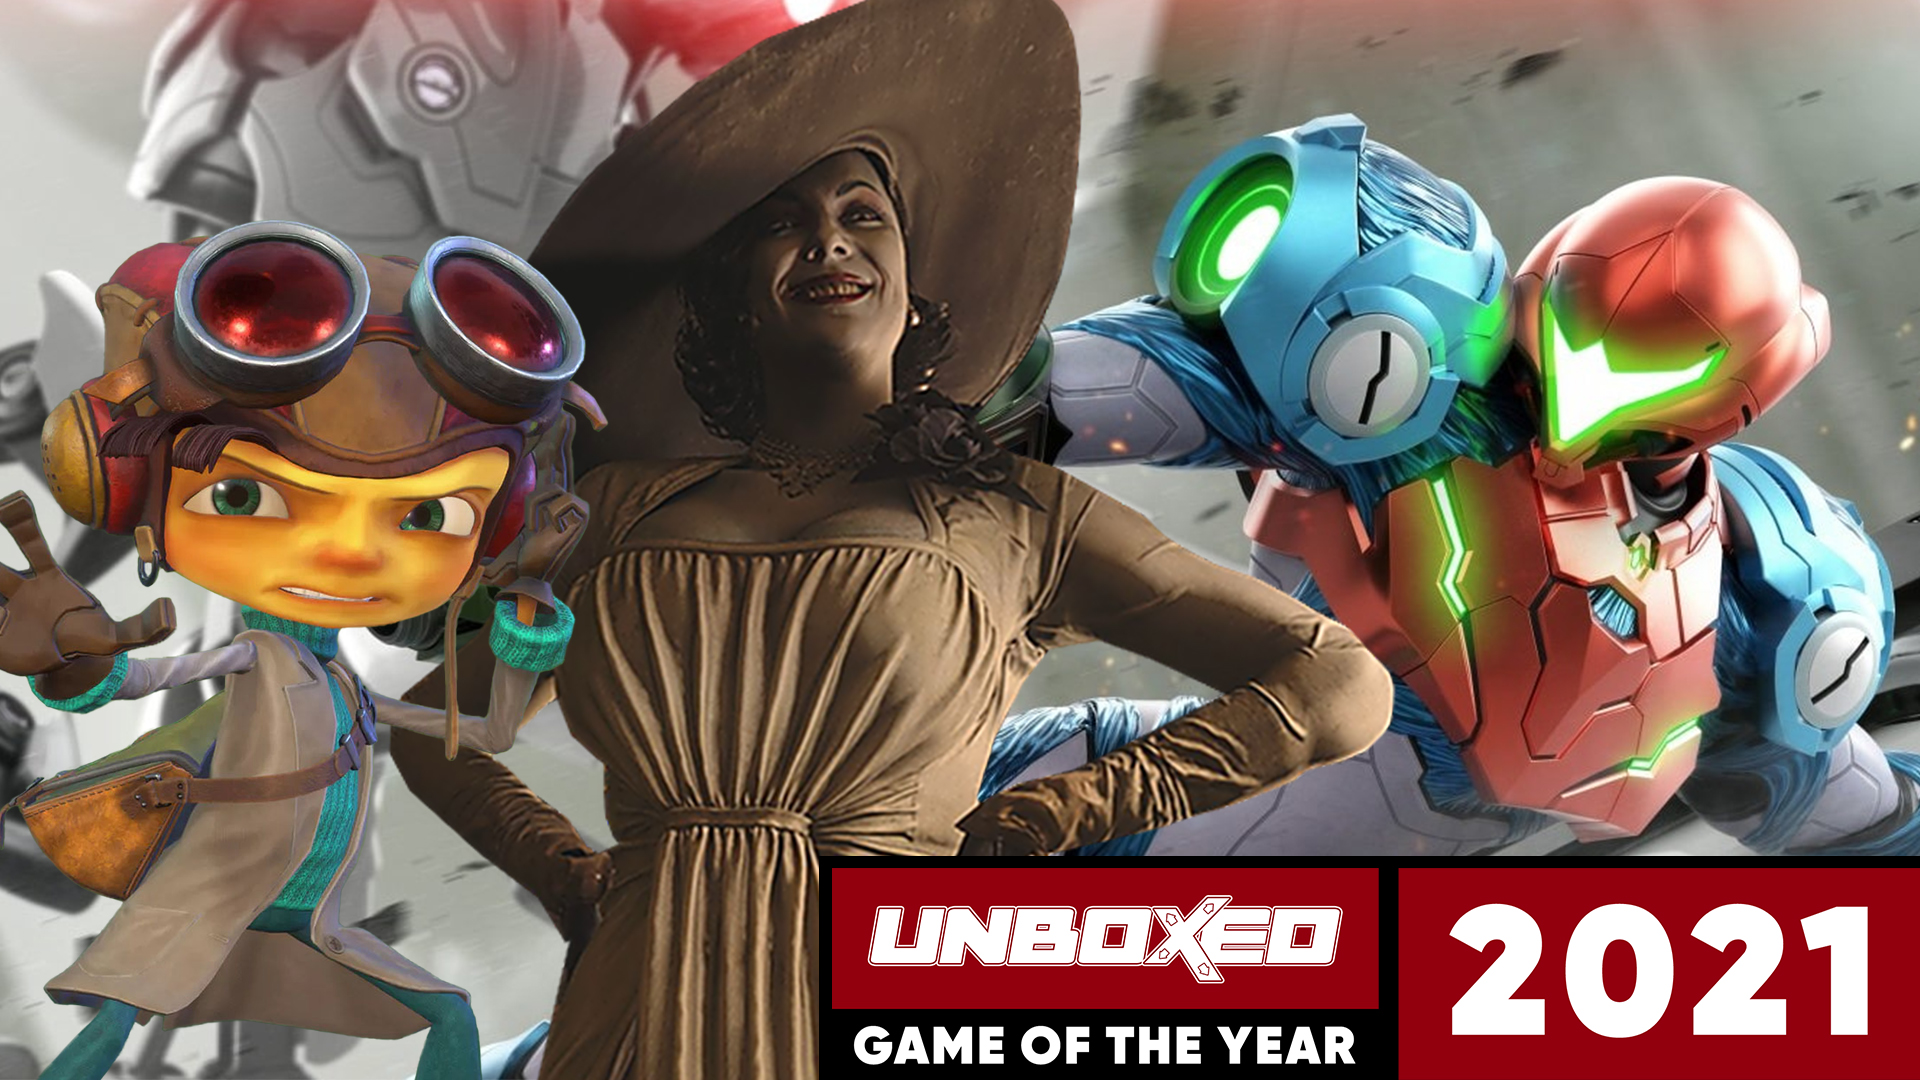 Game of the Year: The Top Ten Games of 2021